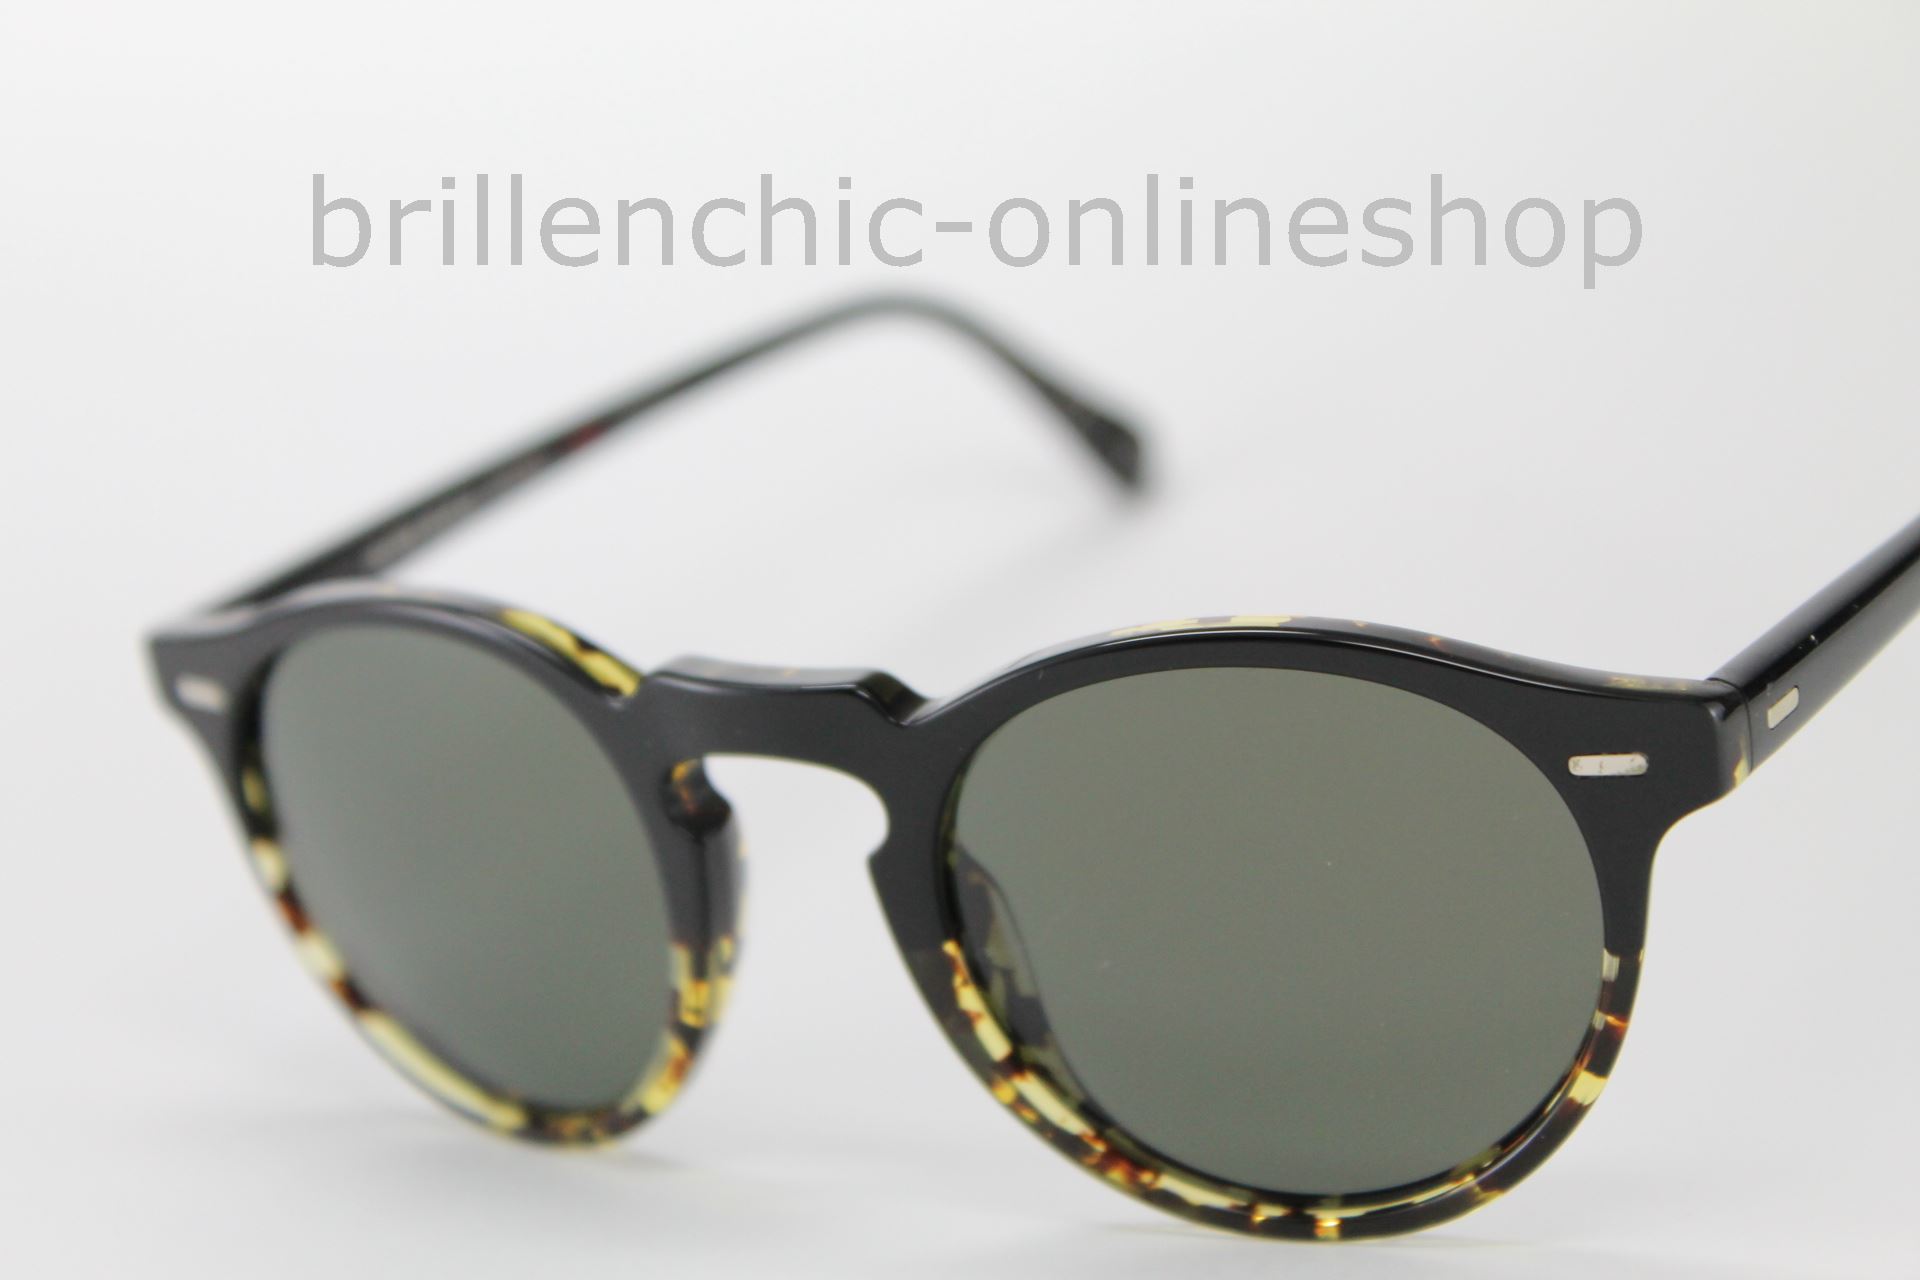 Brillenchic-onlineshop in Berlin - OLIVER PEOPLES GREGORY PECK SUN OV 5217S  5217 1178/P1 - POLARIZED 